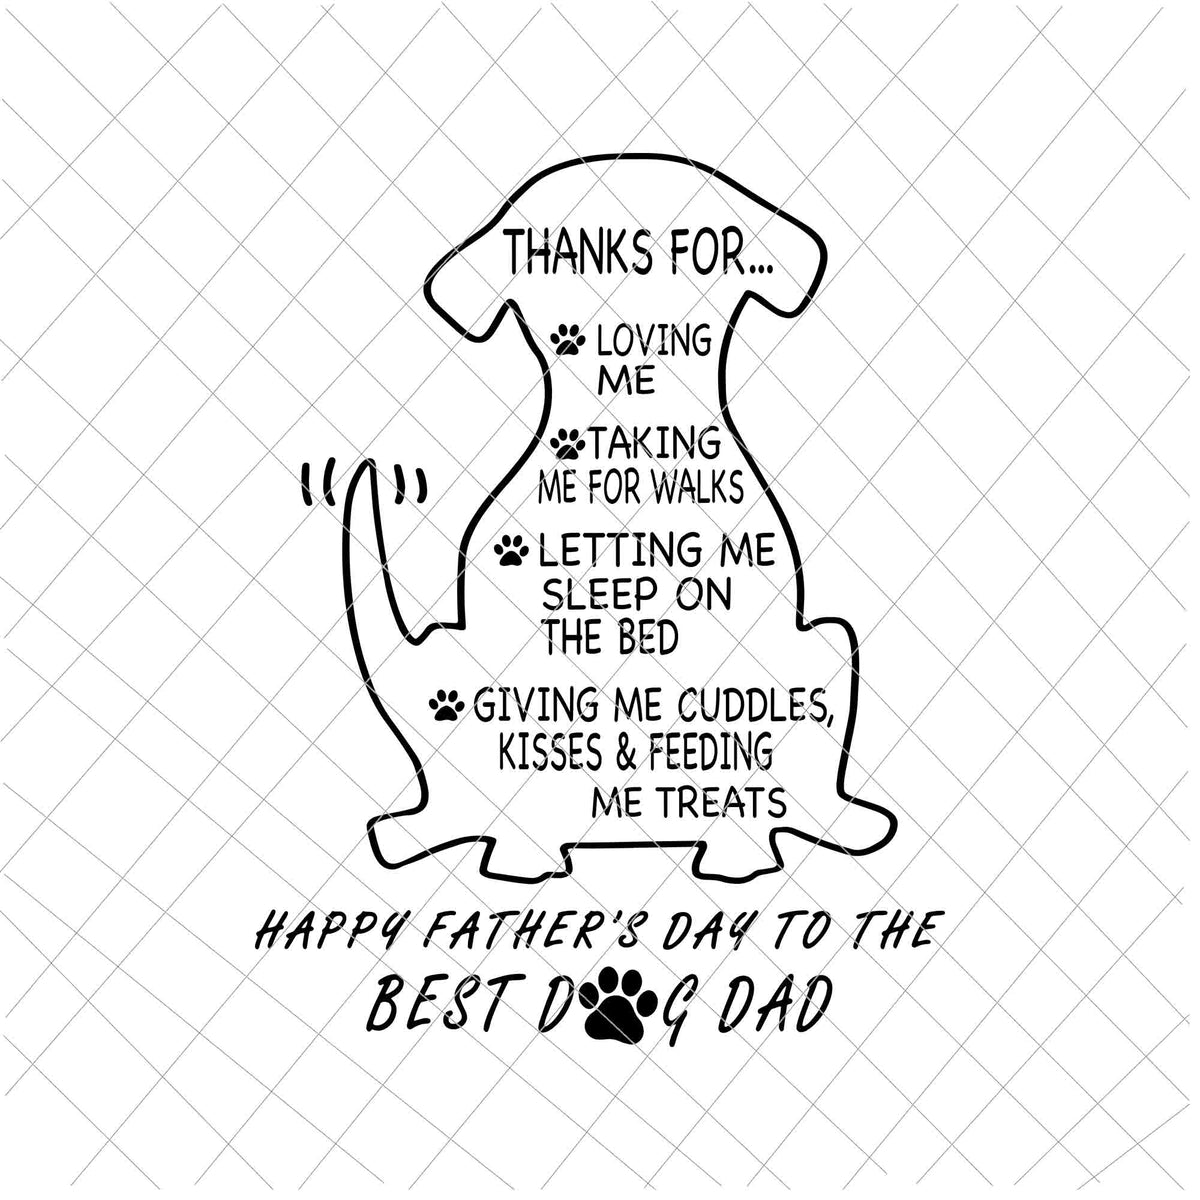 Happy Father's Day To The Best Dog Dad Svg, Thanks For Loving Me, Taki ...